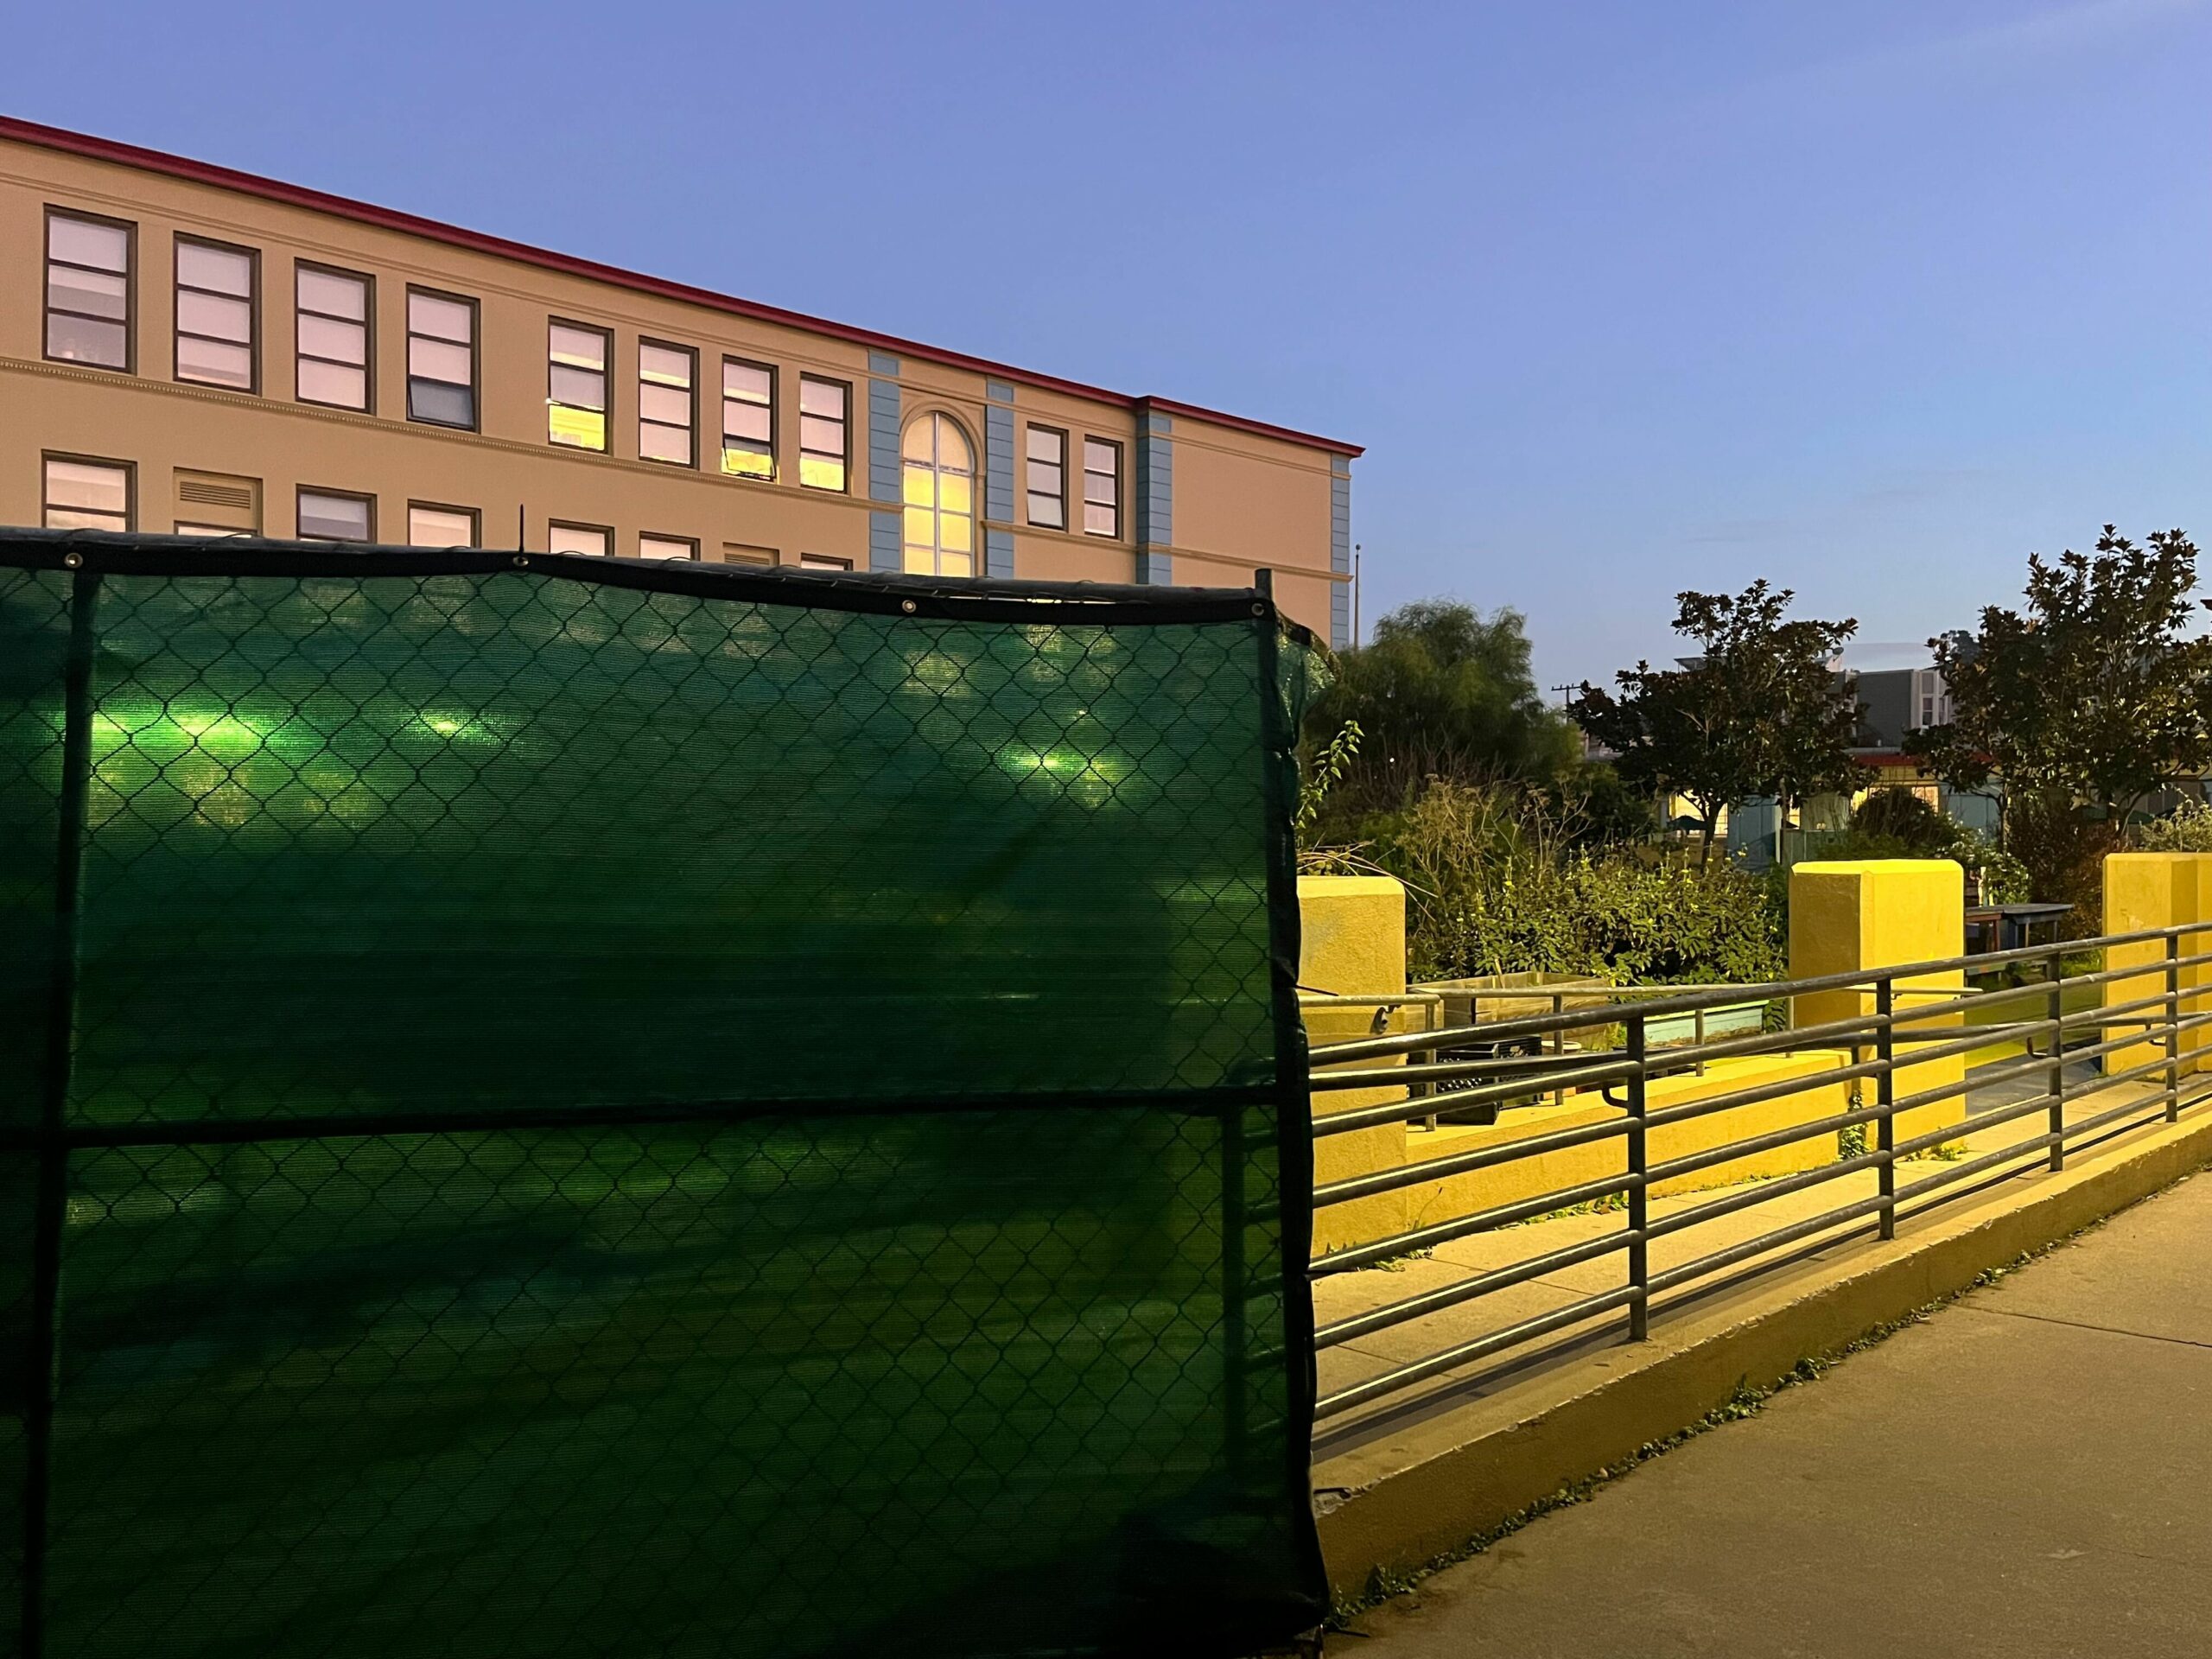 Lead found in SF school’s water following outcry over soil discovery